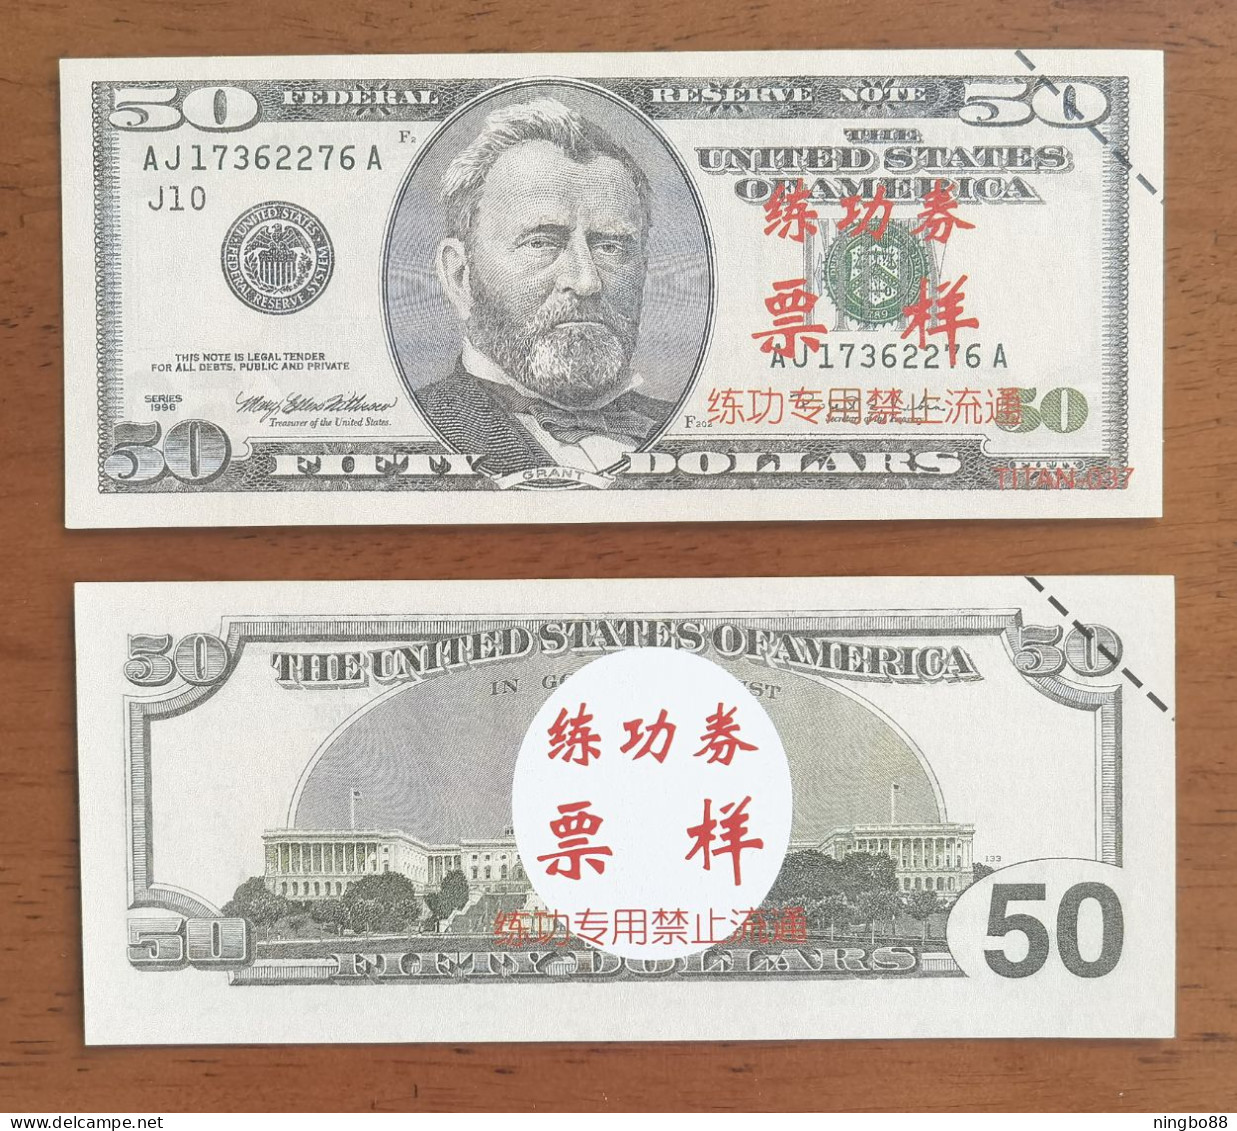 China BOC Bank (Bank Of China) Training/test Banknote,United States D Series $50 Dollars Note Specimen Overprint - Collections